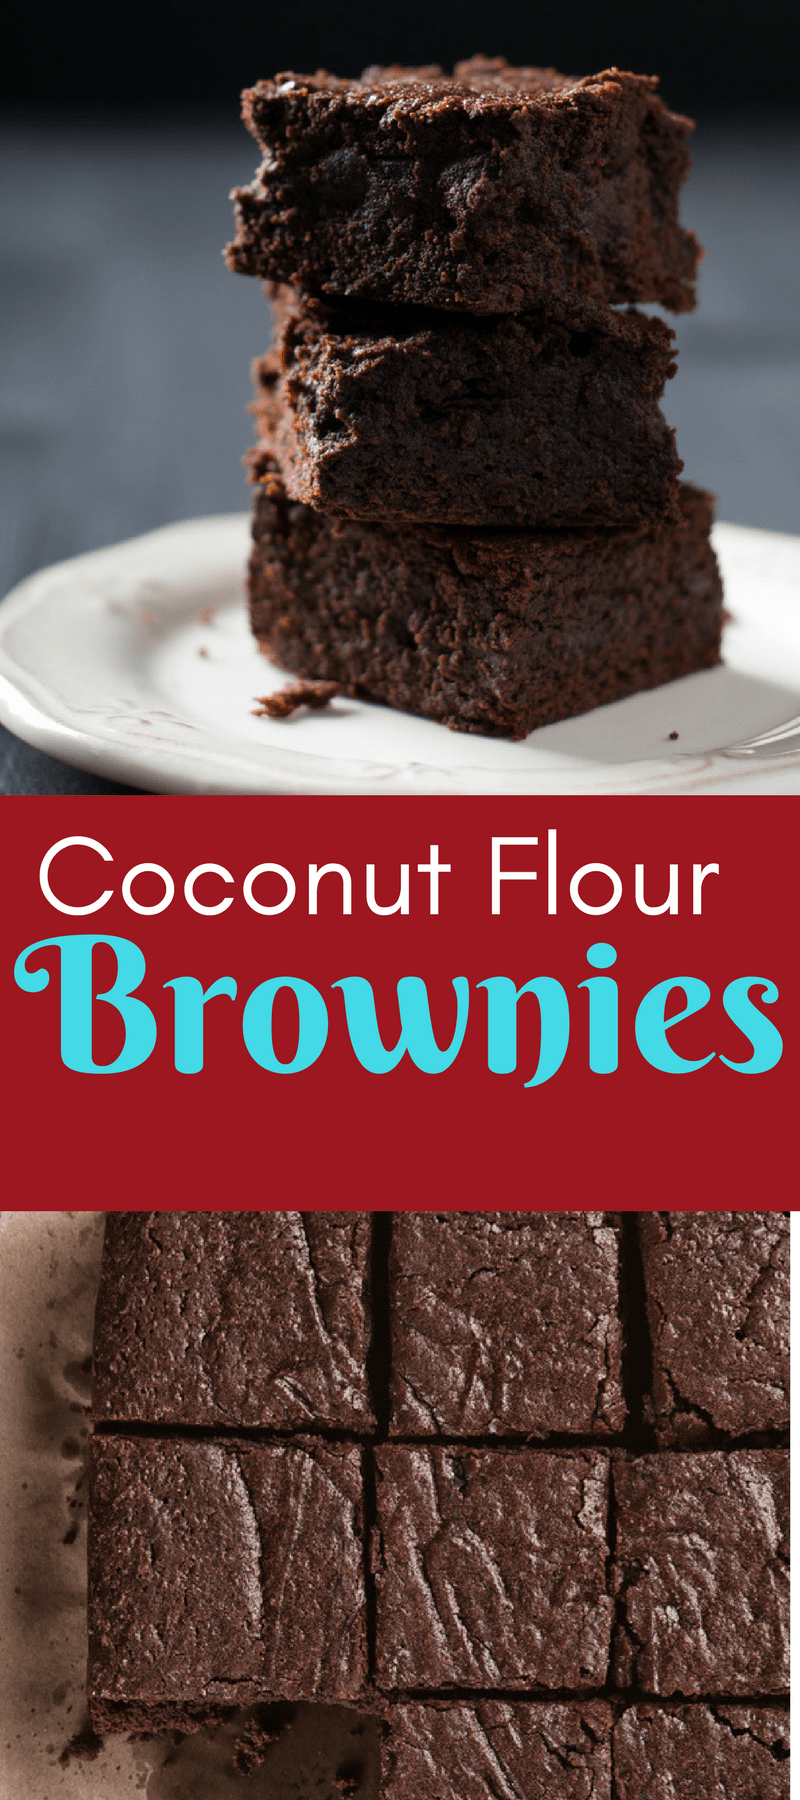 Now and then I like to have a paleo dessert and these are my go-to for a rich, chocolaty cake-like coconut flour brownies. Dare I say that these are the best coconut flour brownies, ever?